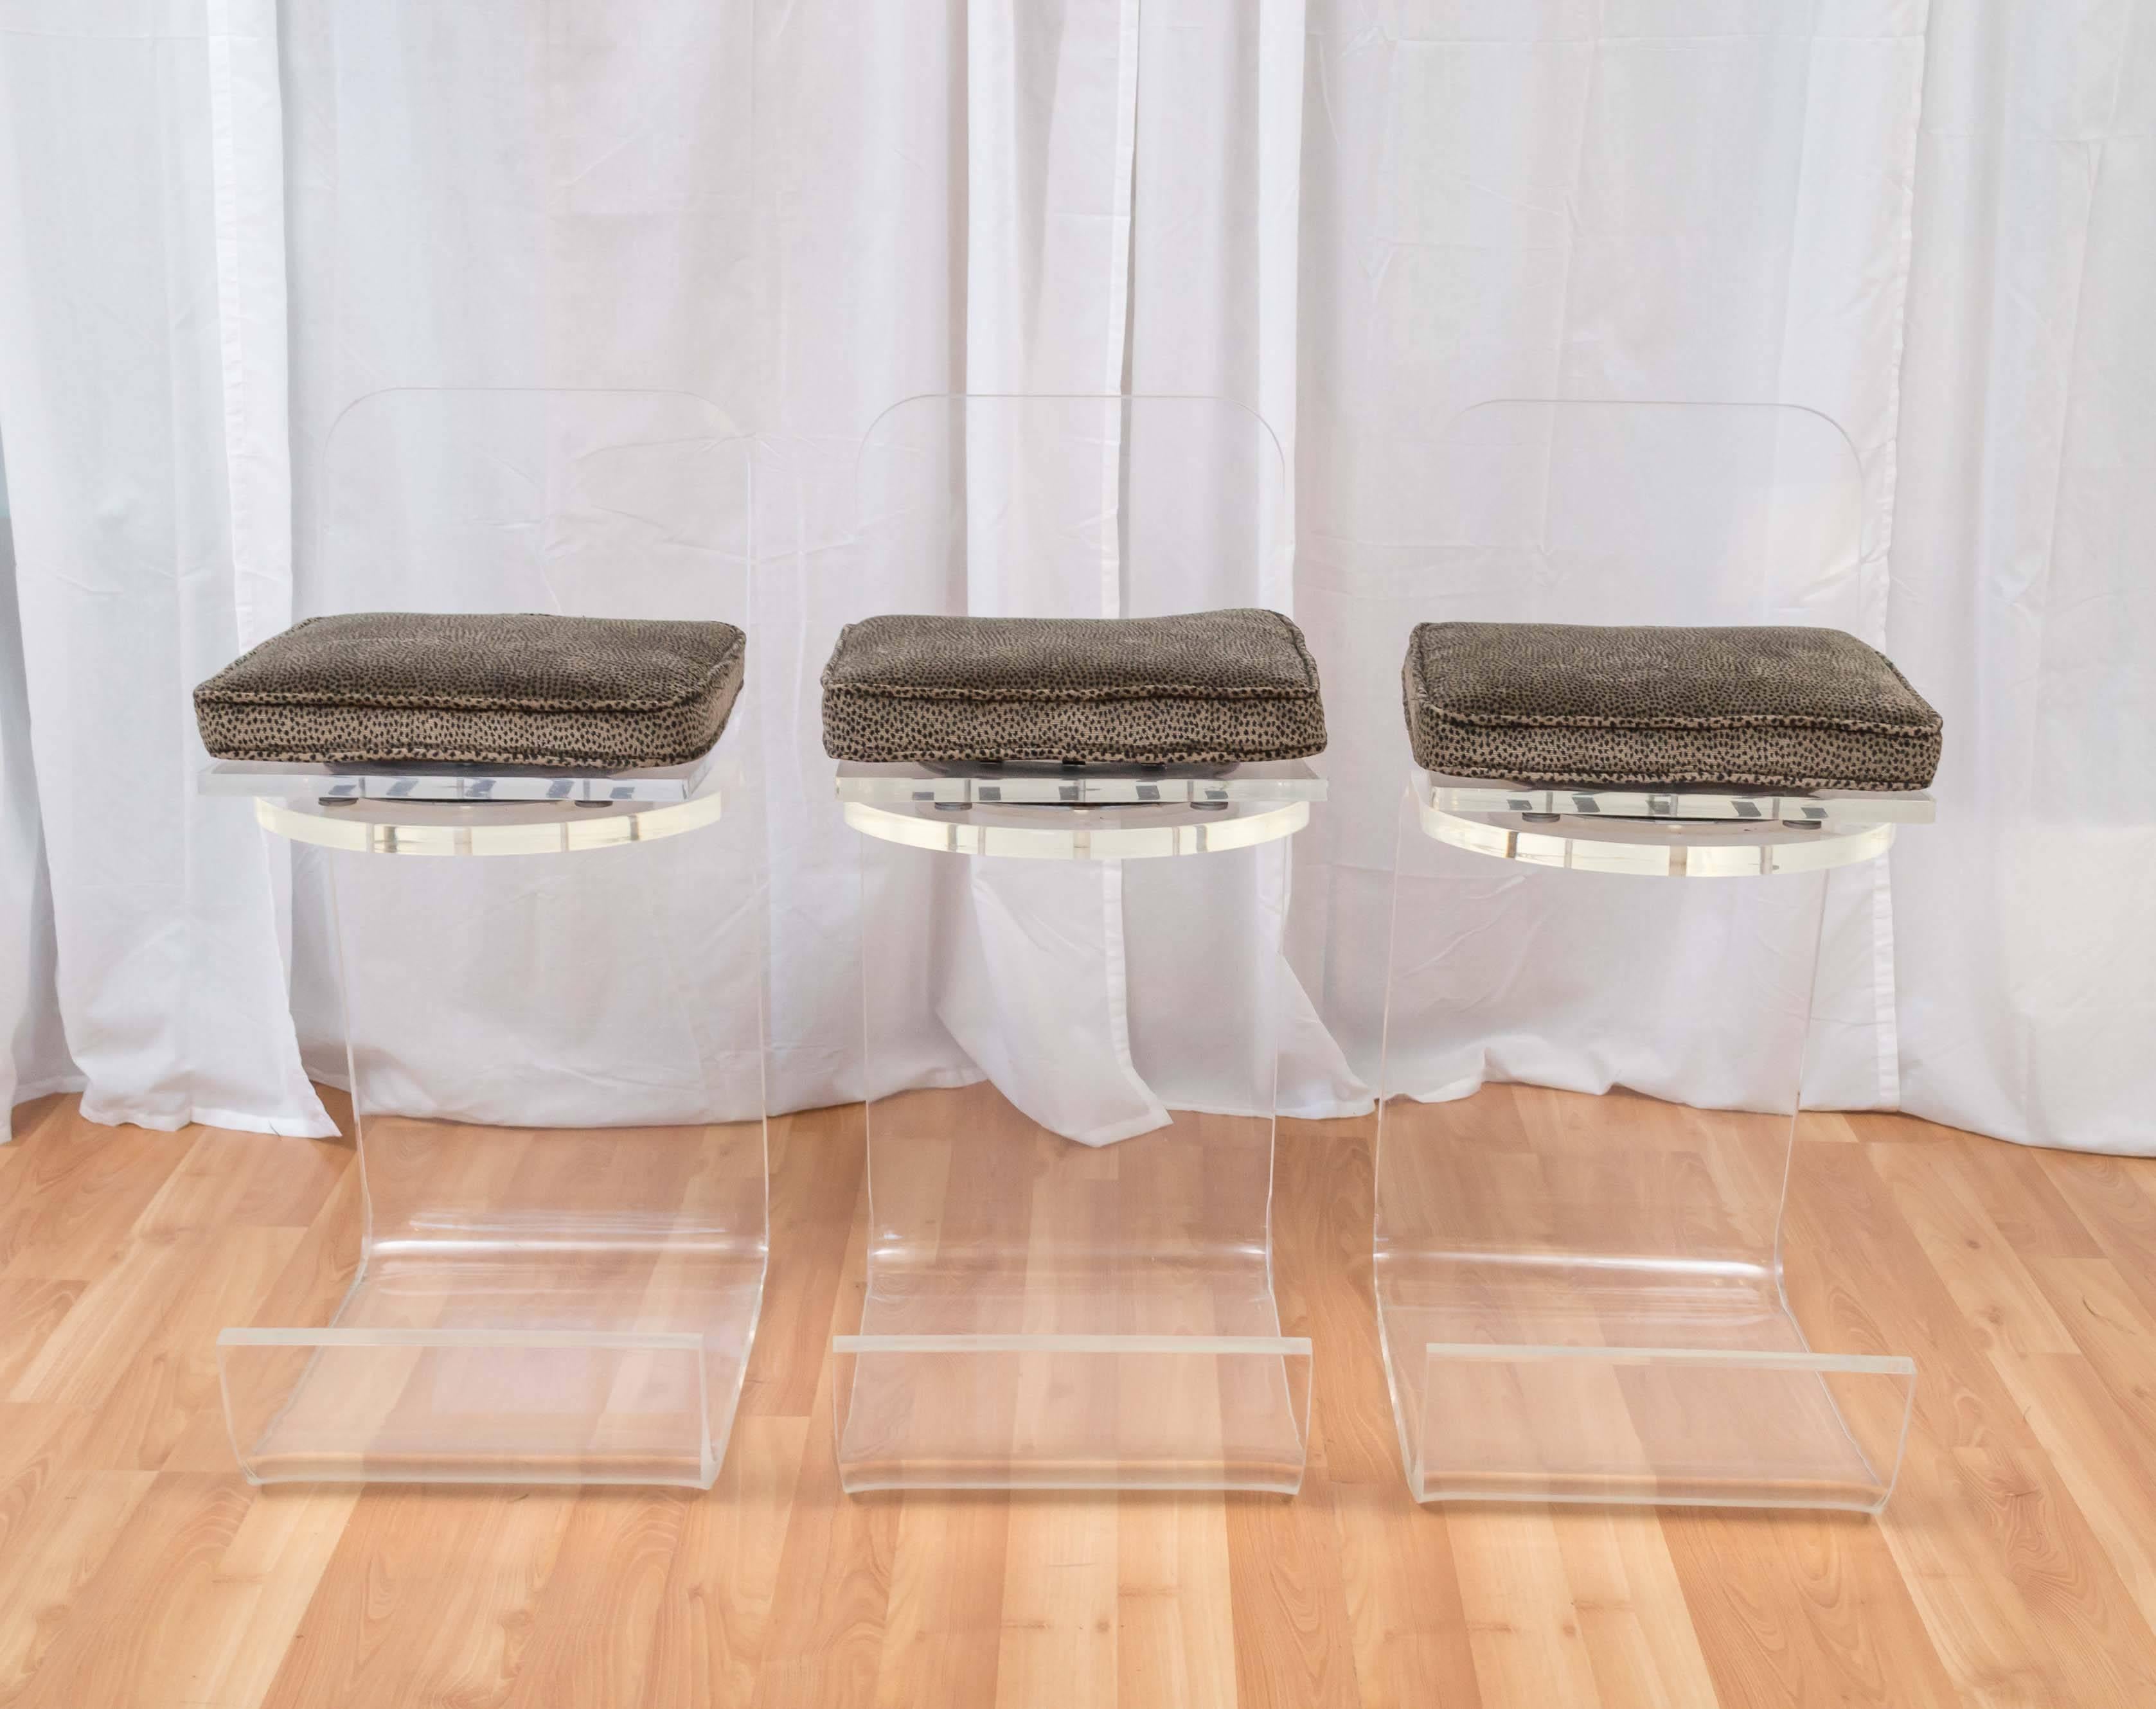 A very uncommon three-piece set of Paul M. Jones-style Lucite counter-height bar stools in uncommonly great condition.

Sleek, fabulous and deceptively simple, they’re a clear example of economy of design and mastery of materials at their finest.